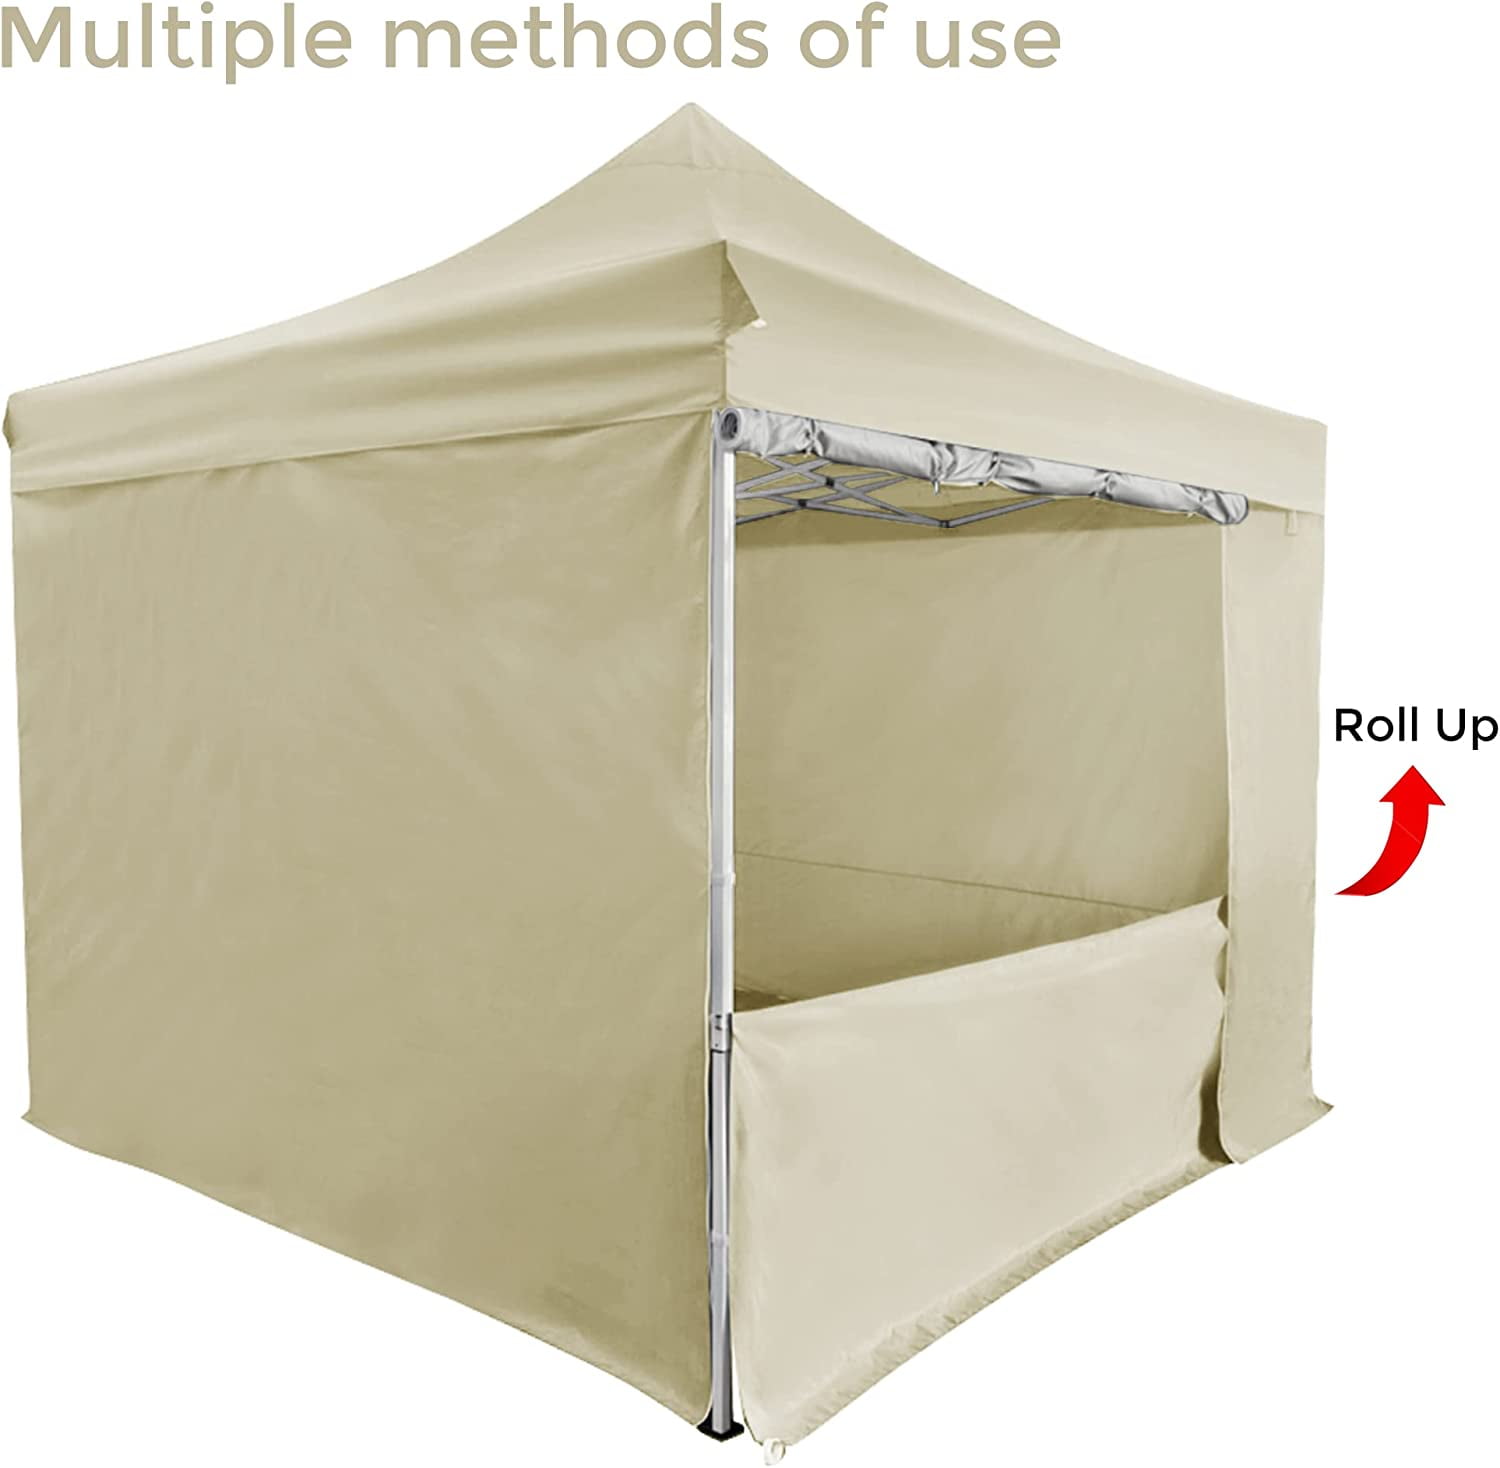 AsterOutdoor 10' x 10' Pop Up Sidewall Canopy Tent - 5 pieces of